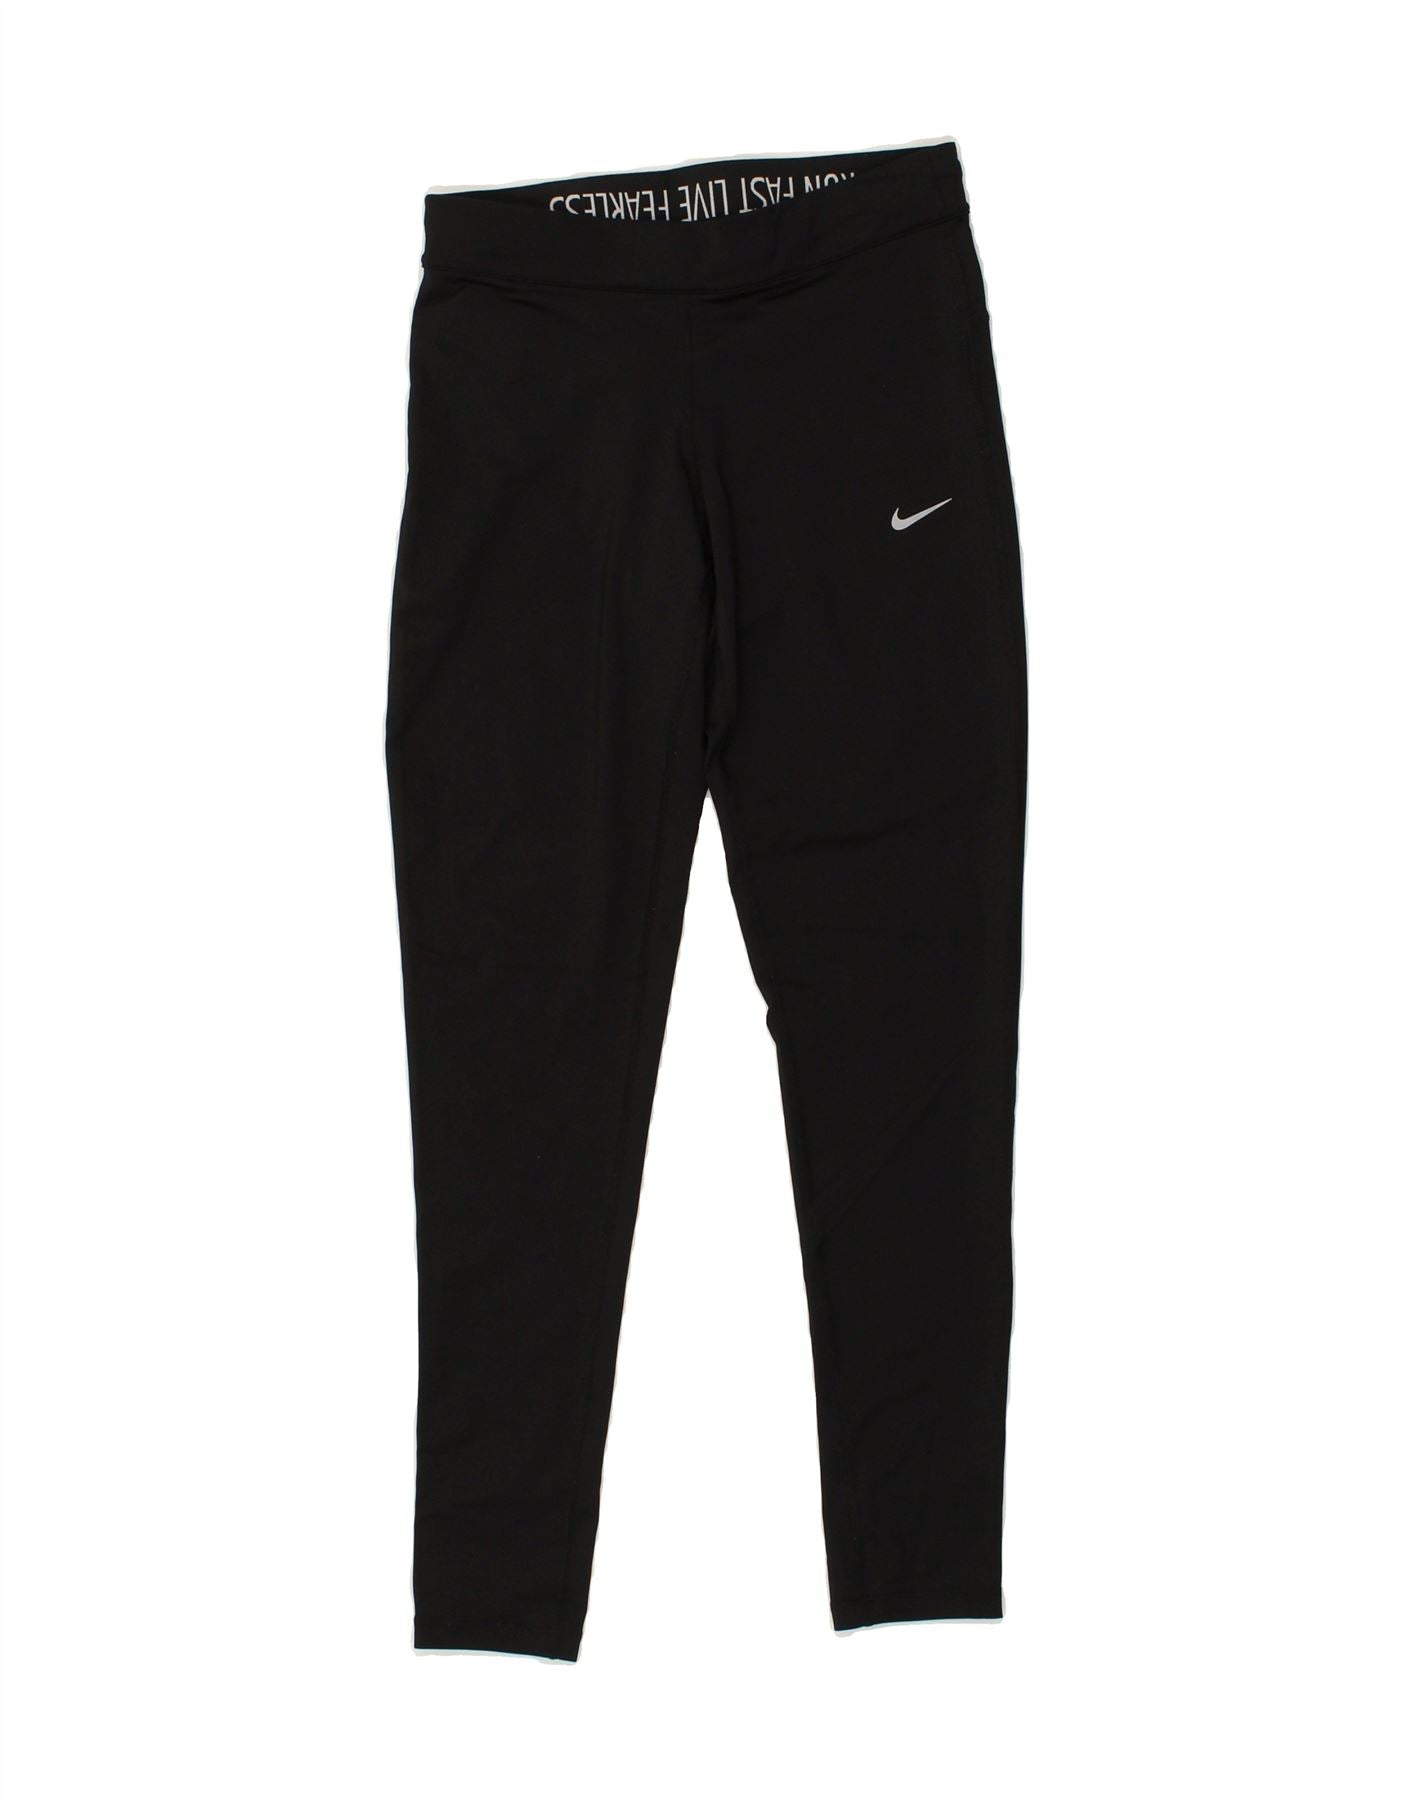 NIKE Womens Dri Fit Leggings UK 8 Small Black Polyester, Vintage &  Second-Hand Clothing Online